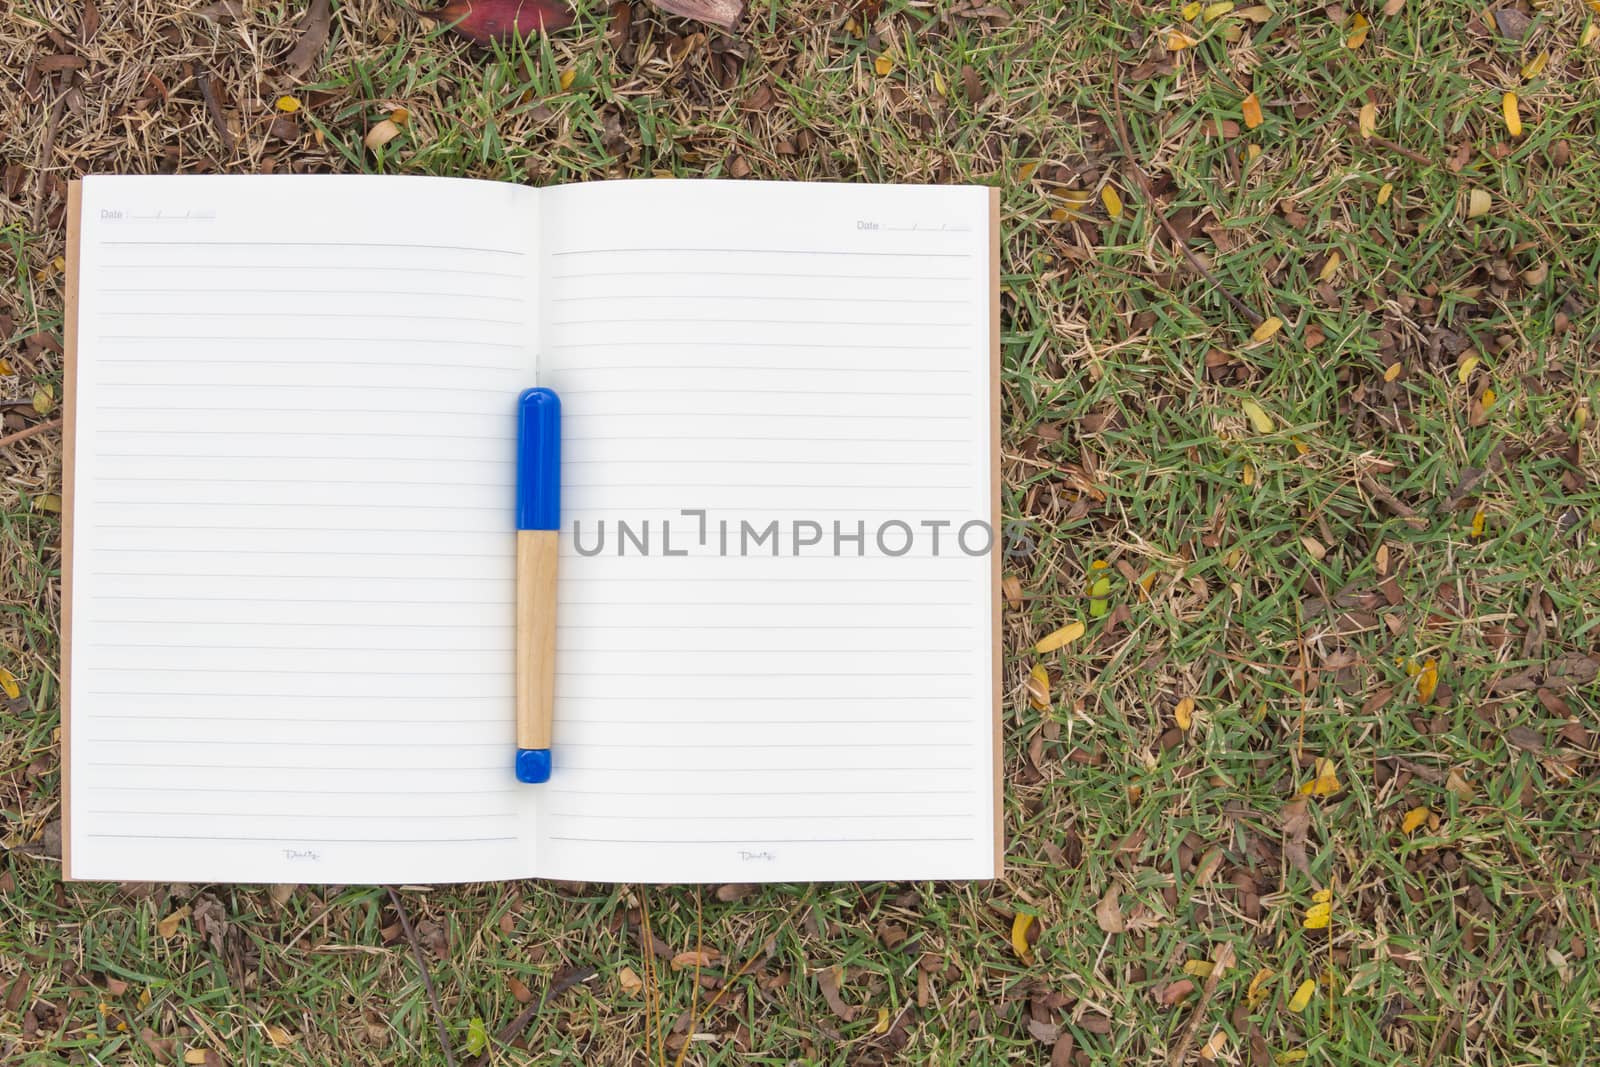 Blank notebook on the grass with blue pen in the park. View from above